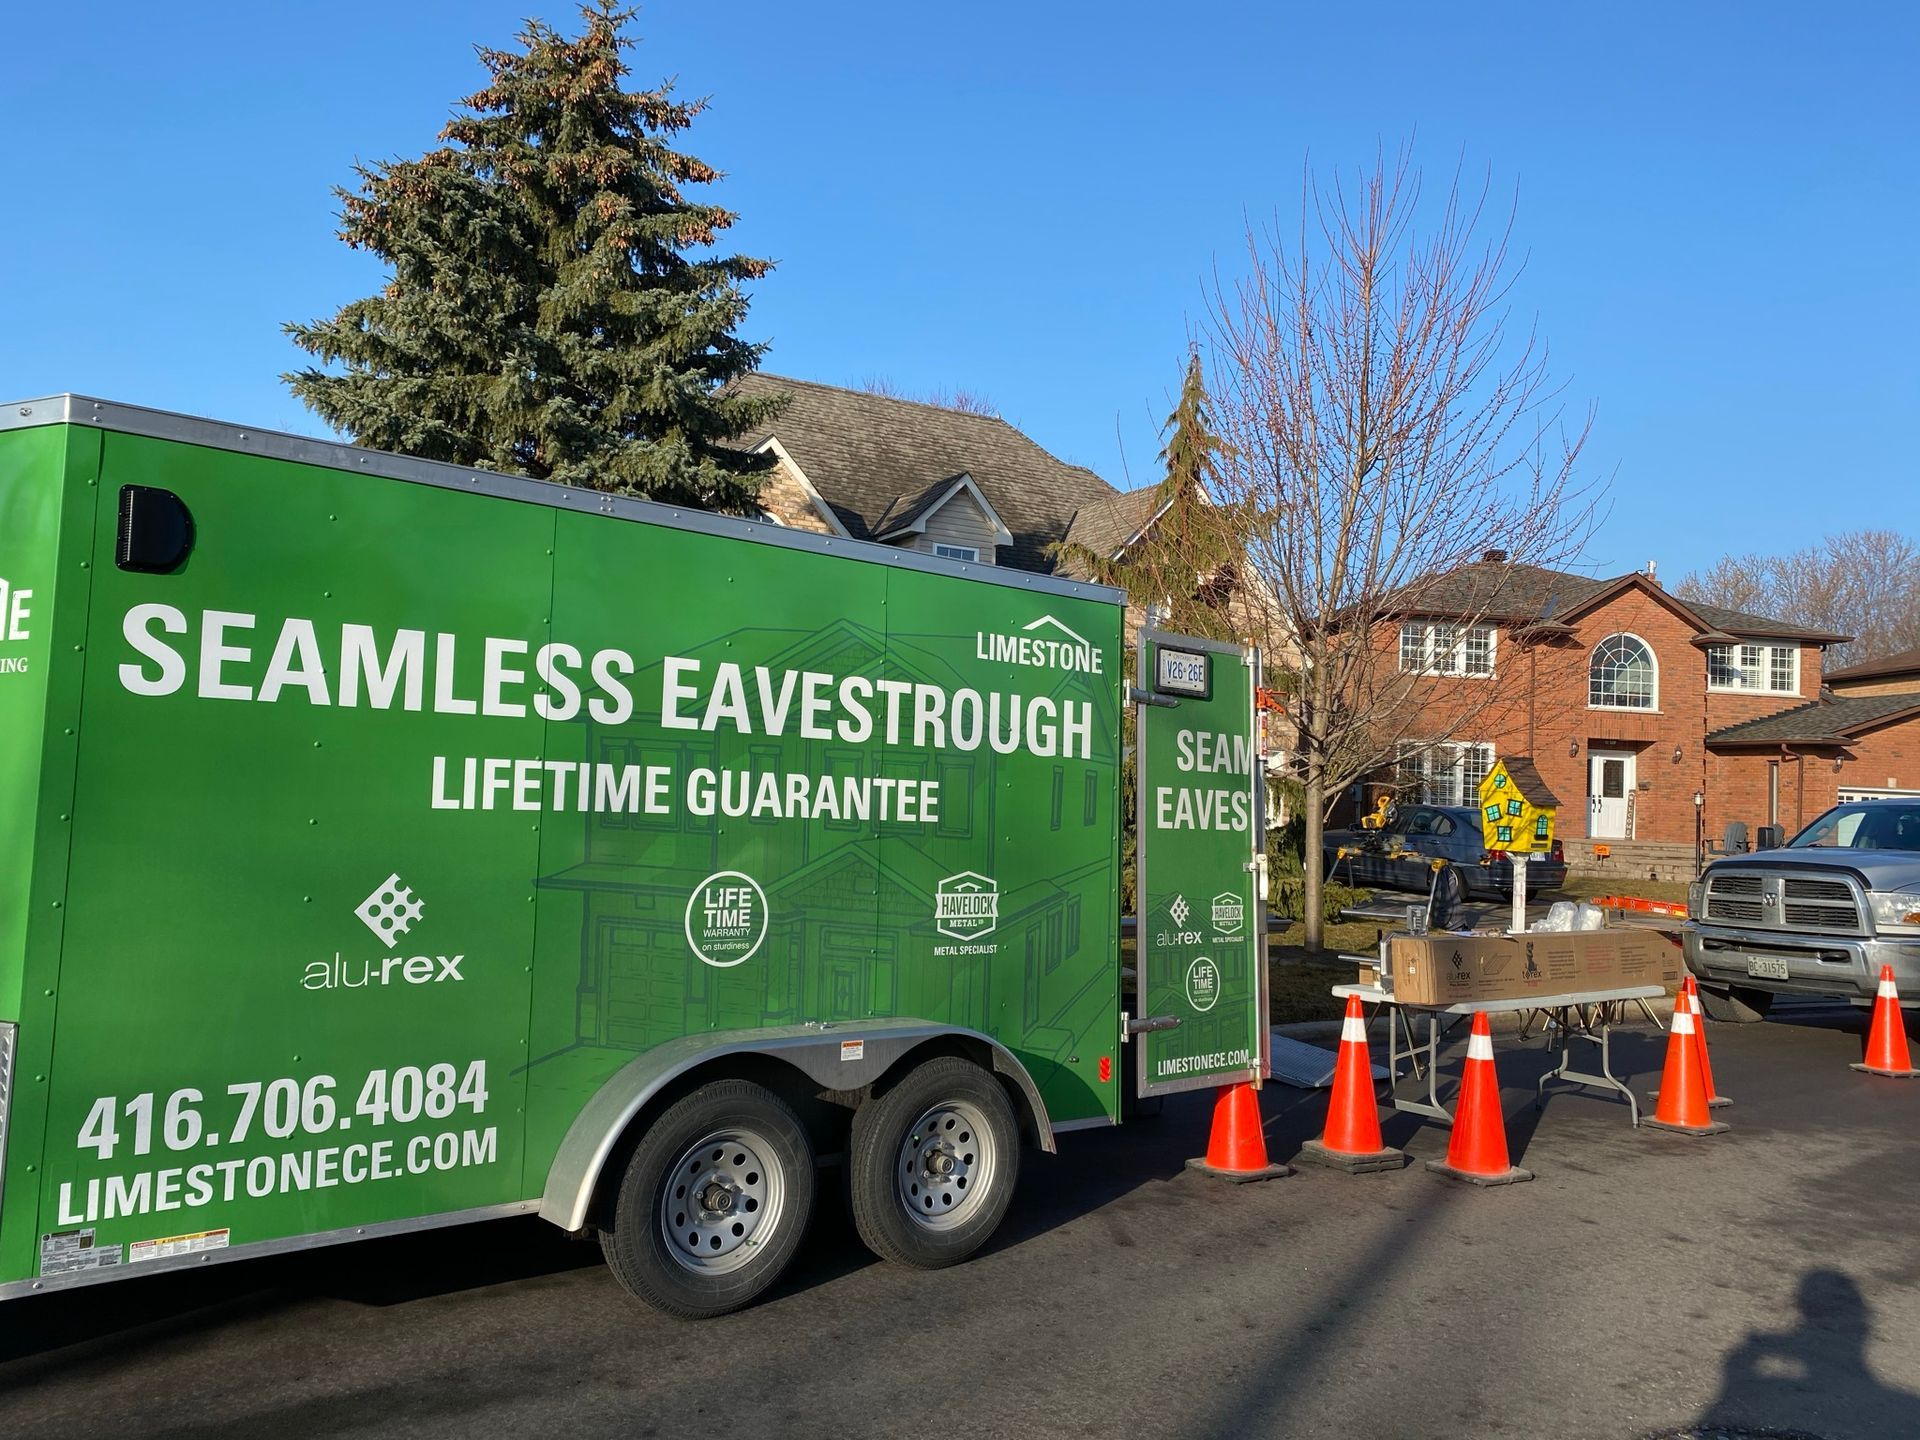 a green seamless eavestrough trailer is parked on the side of the road